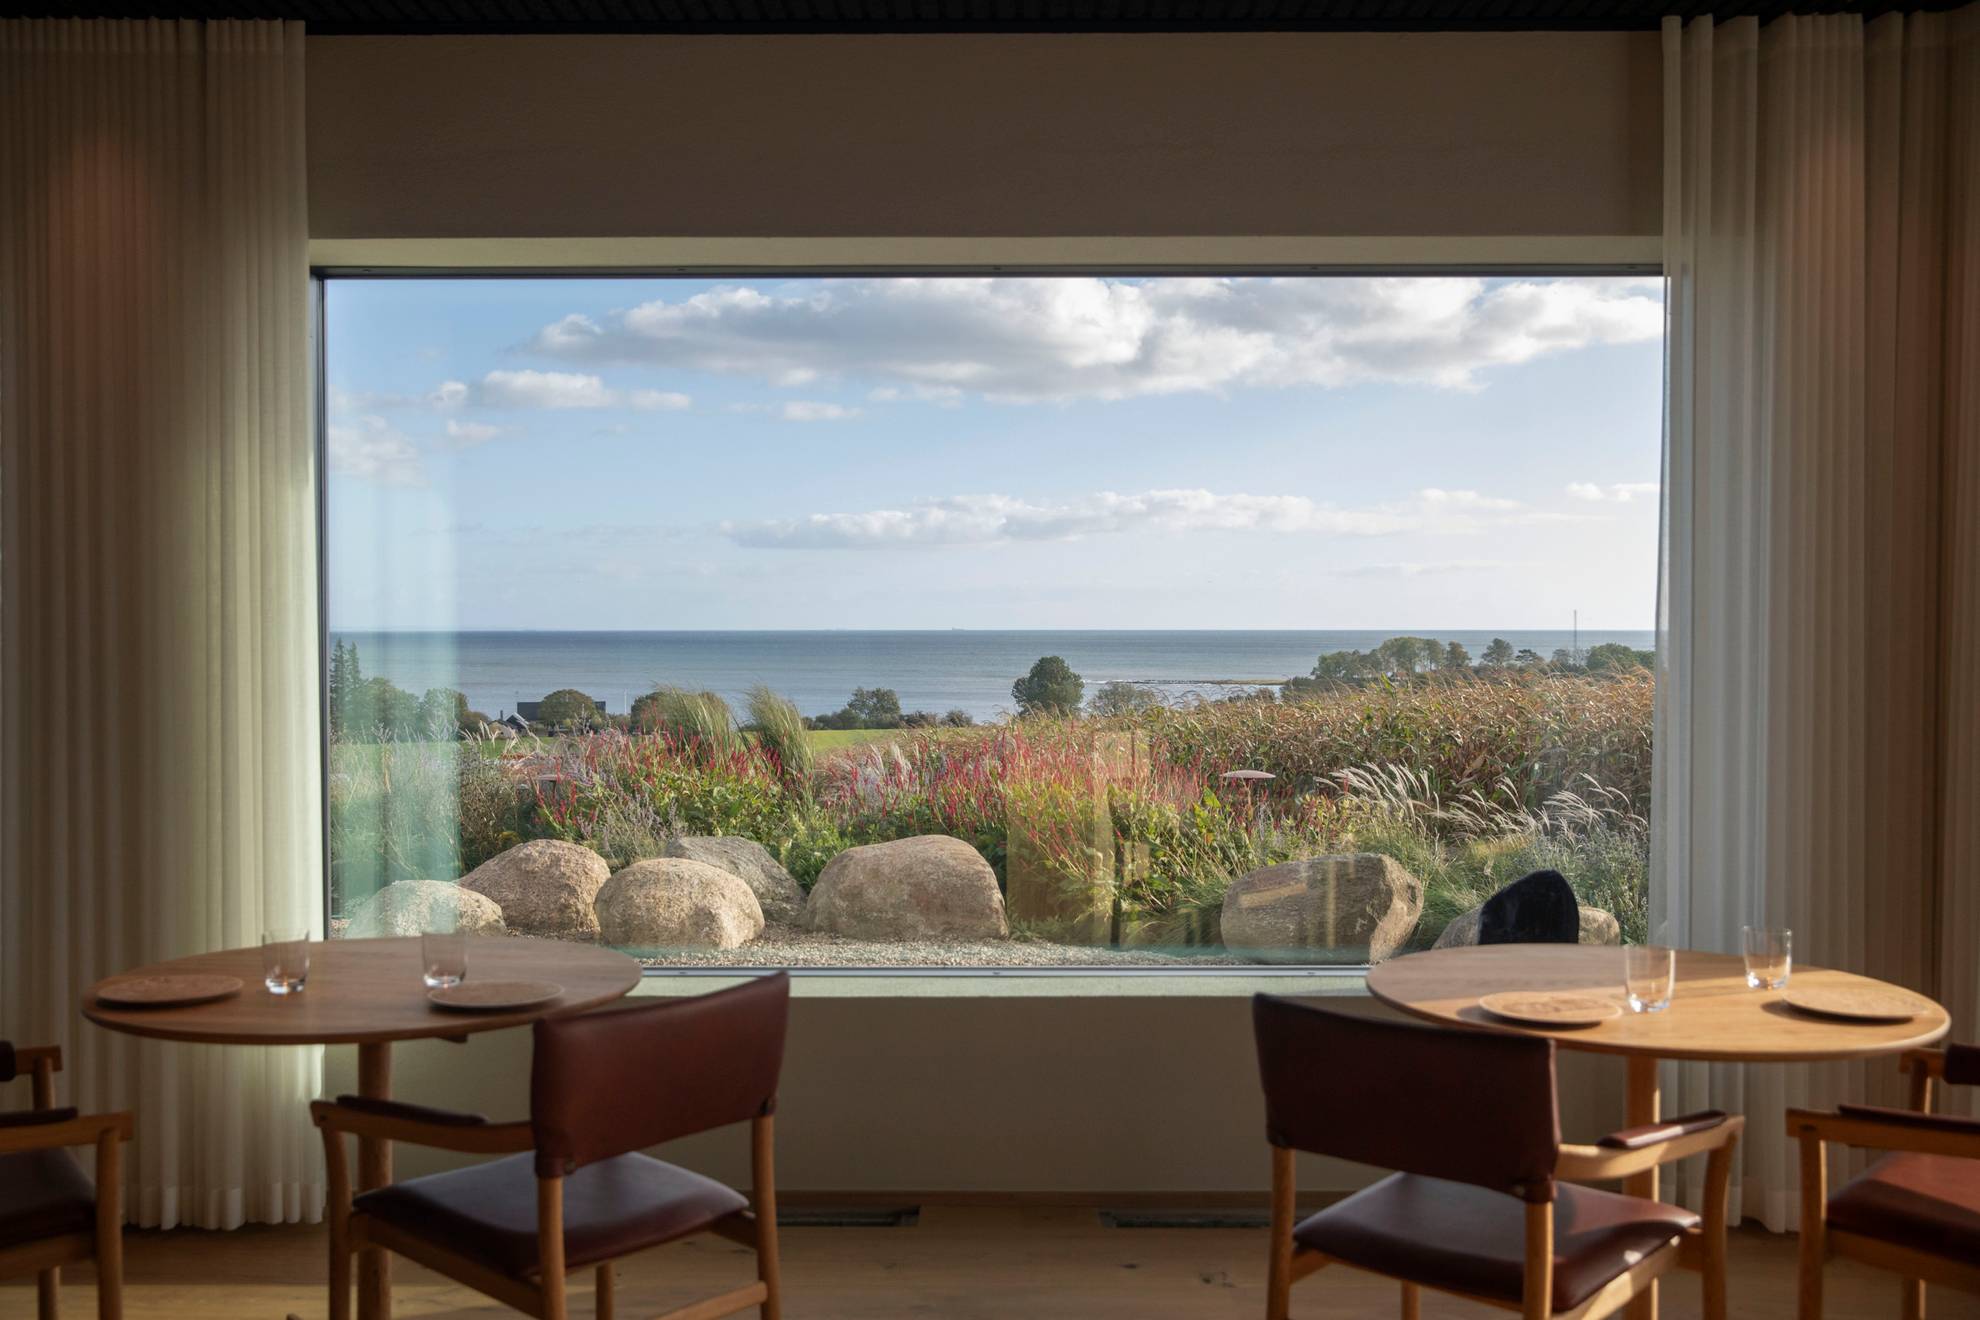 Two tables with chairs at Vyn restaurant, standing in front of a large window and overlooking the sea on a summer day.